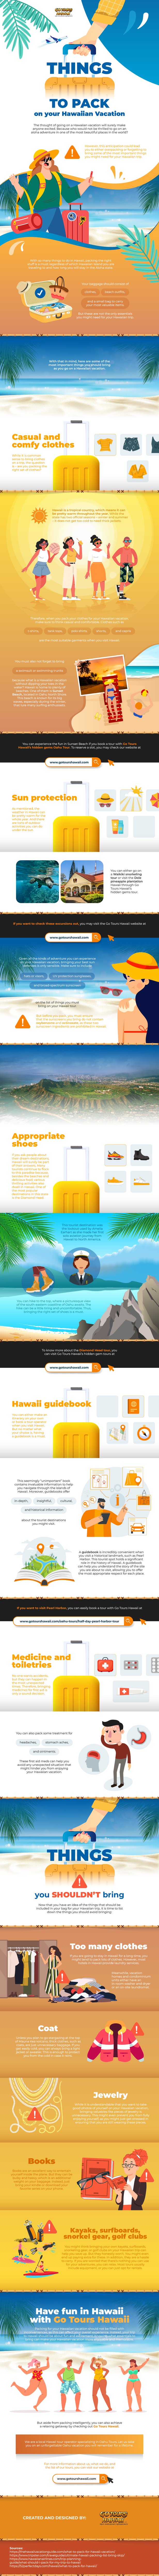 Things-to-Pack-on-your-Hawaiian-Vacation-(Infographic)-image-HF